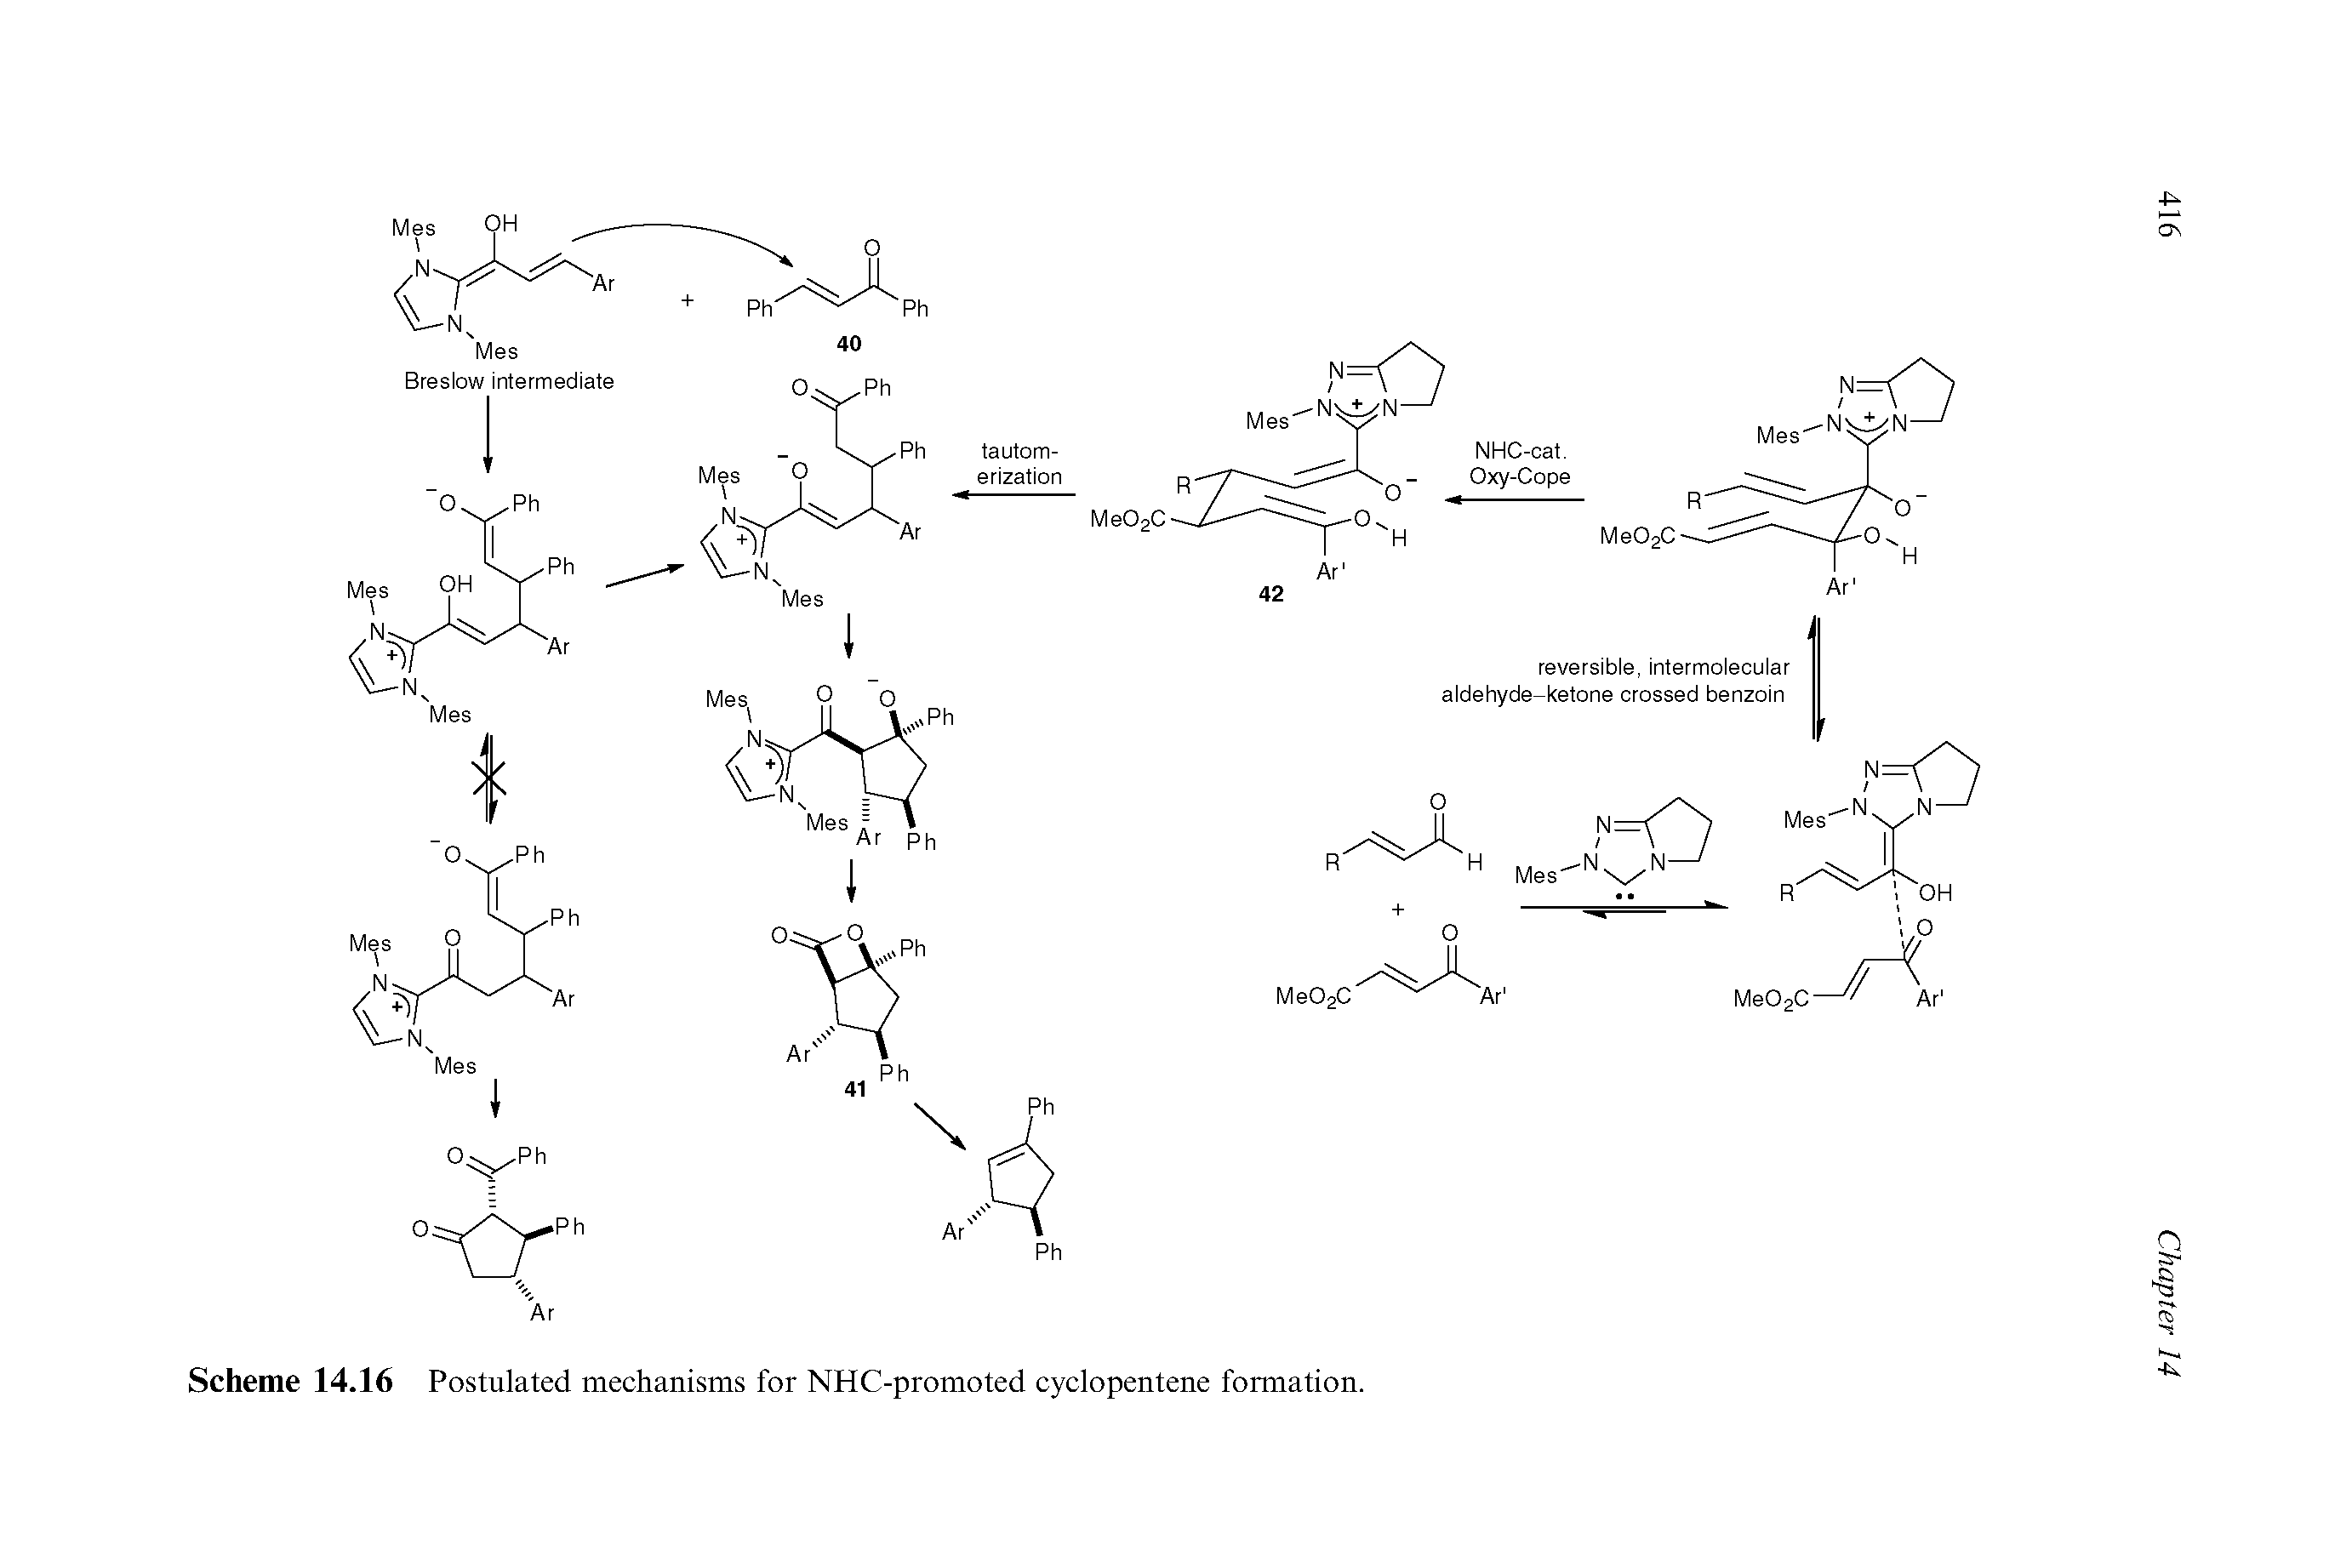 Scheme 14.16 Postulated mechanisms for NHC-promoted cyclopentene formation.